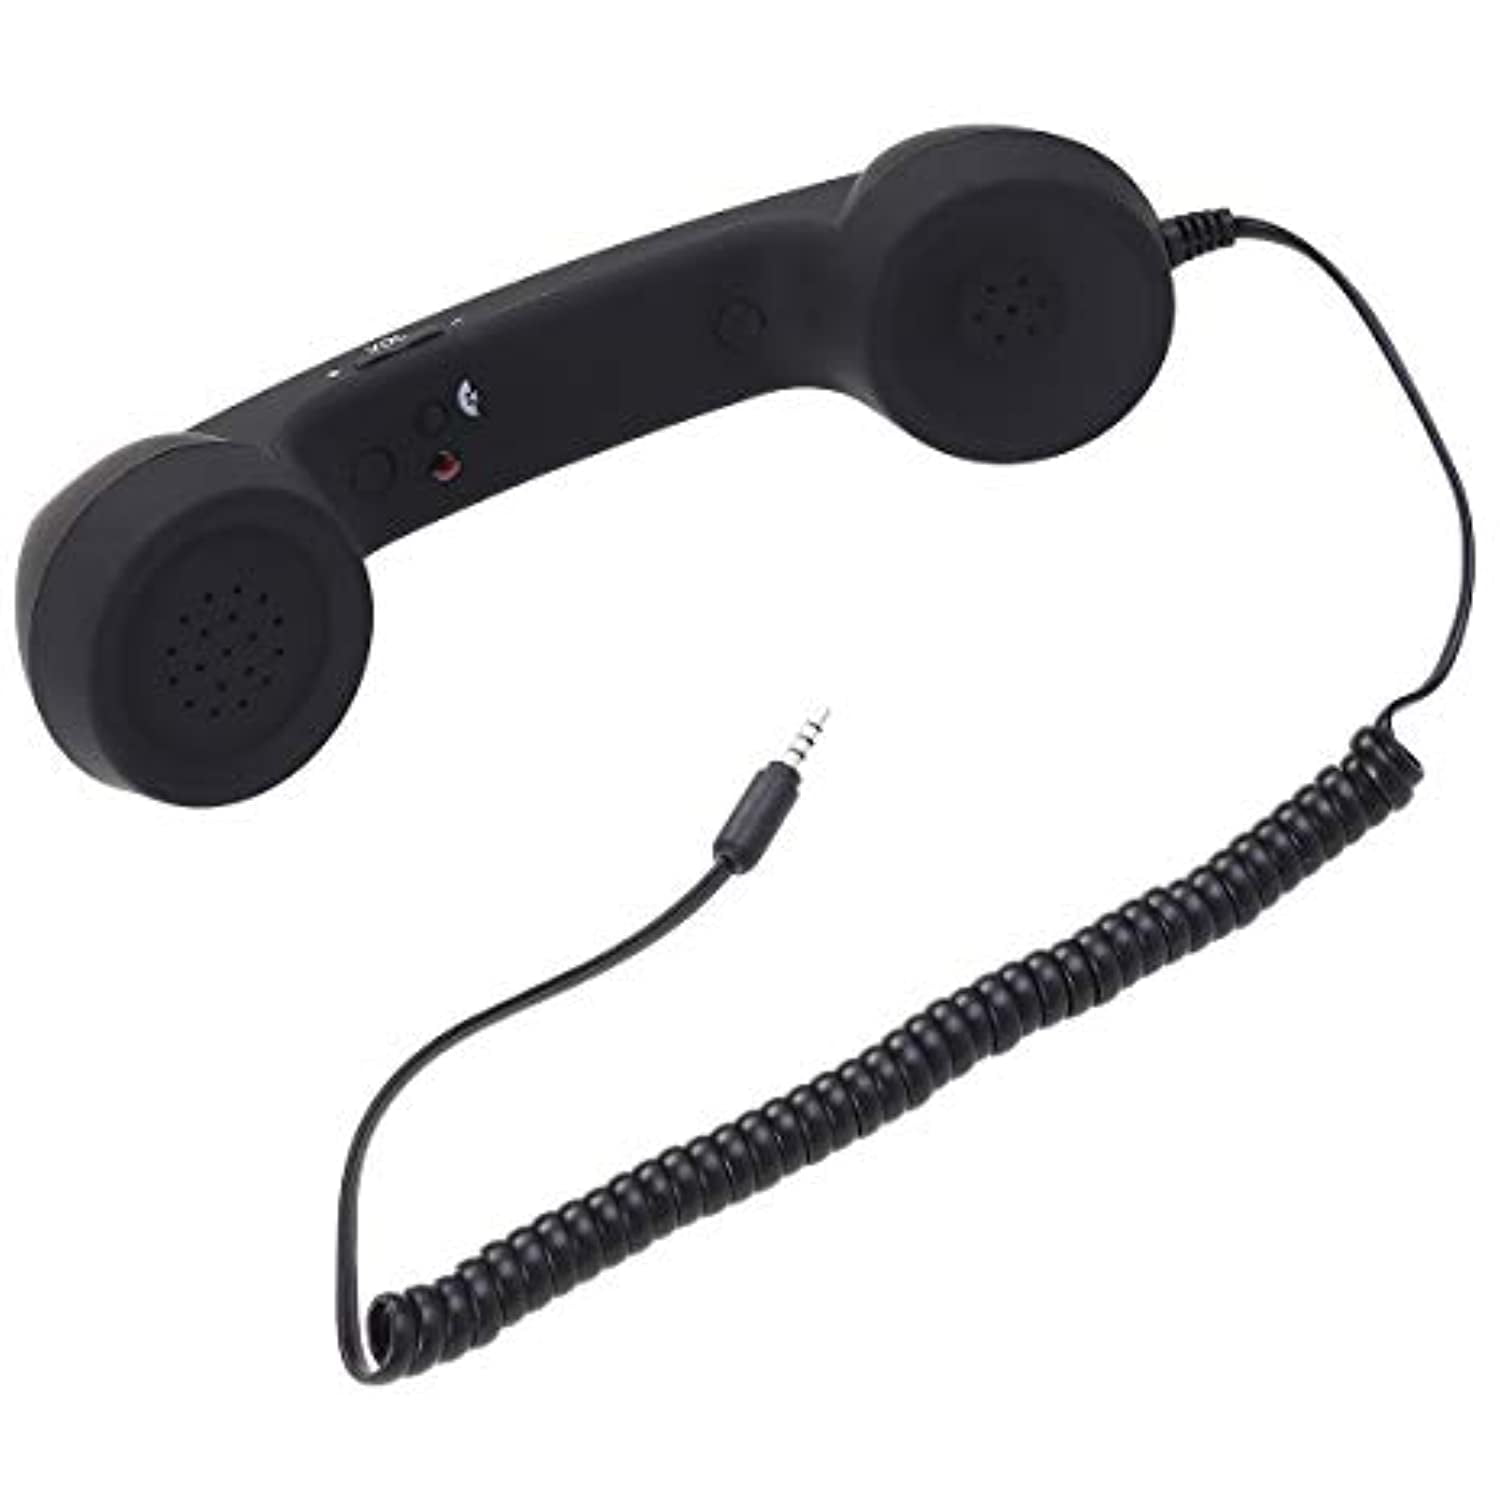 UKCOCO 3.5mm Universal Retro Telephone Handset,Holding A Cell Phone for Phone,Anti Radiation Receivers for Phone Black 